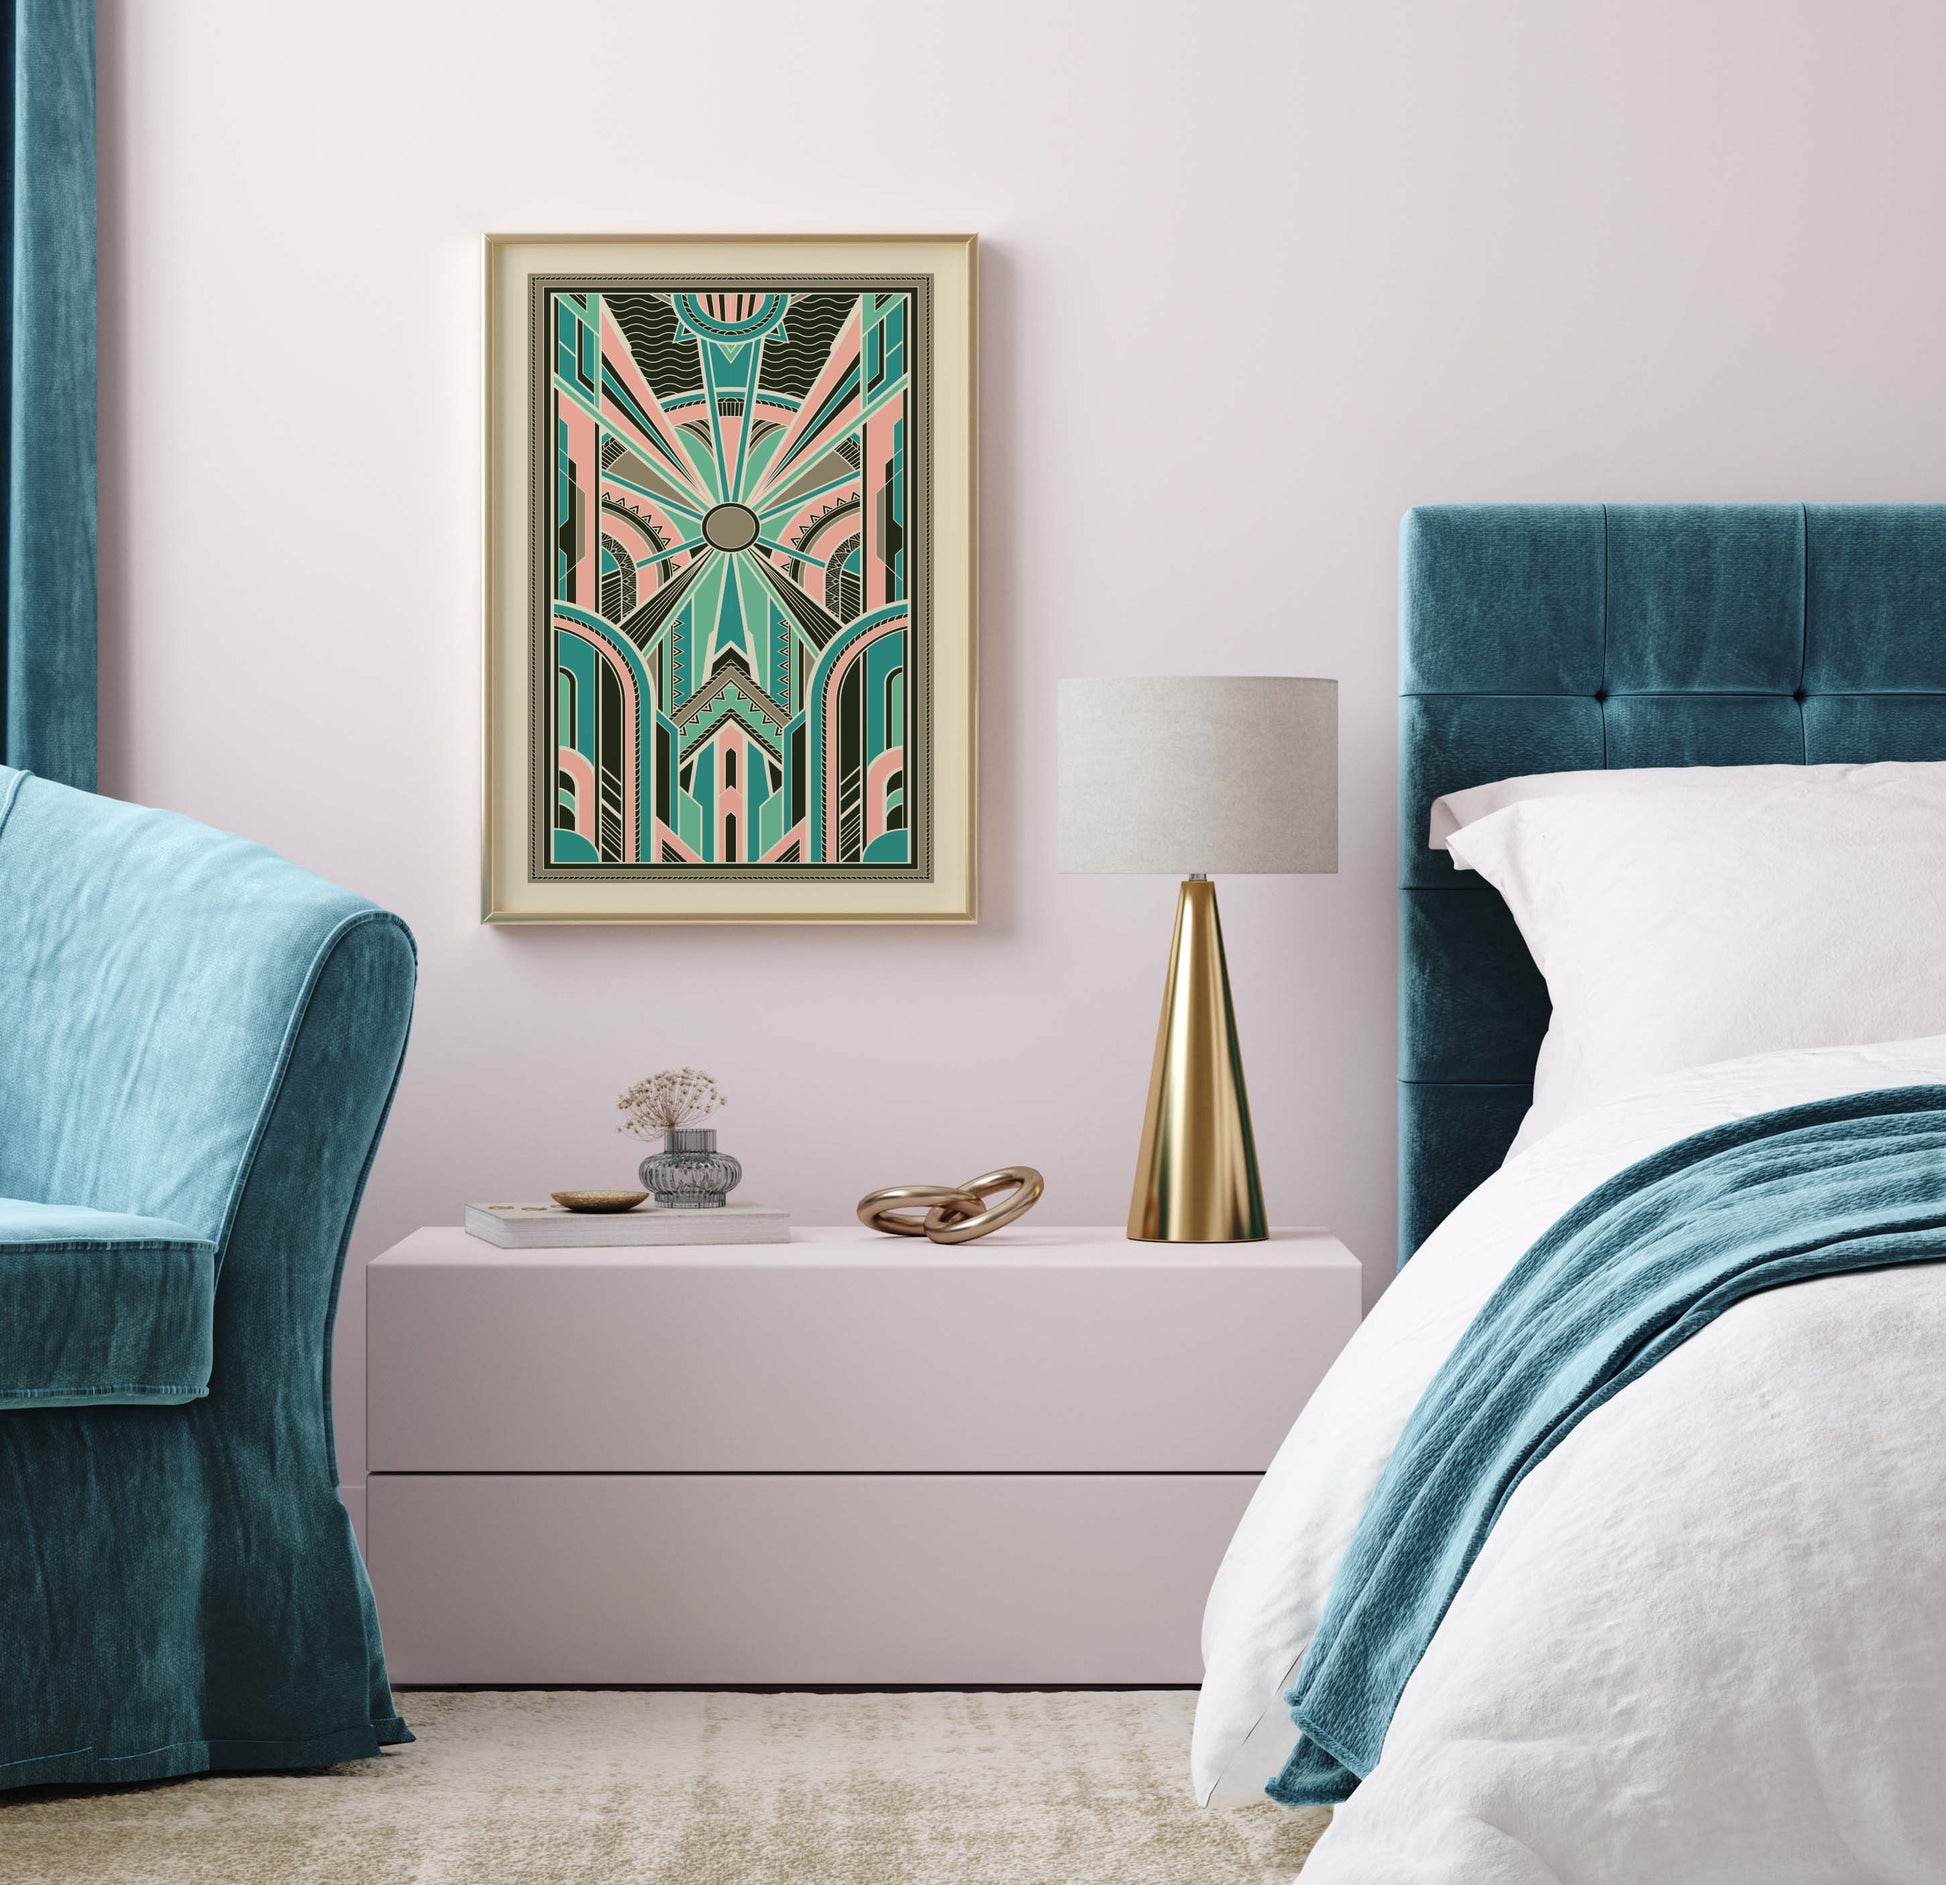 Art deco wall art print in pink and teal